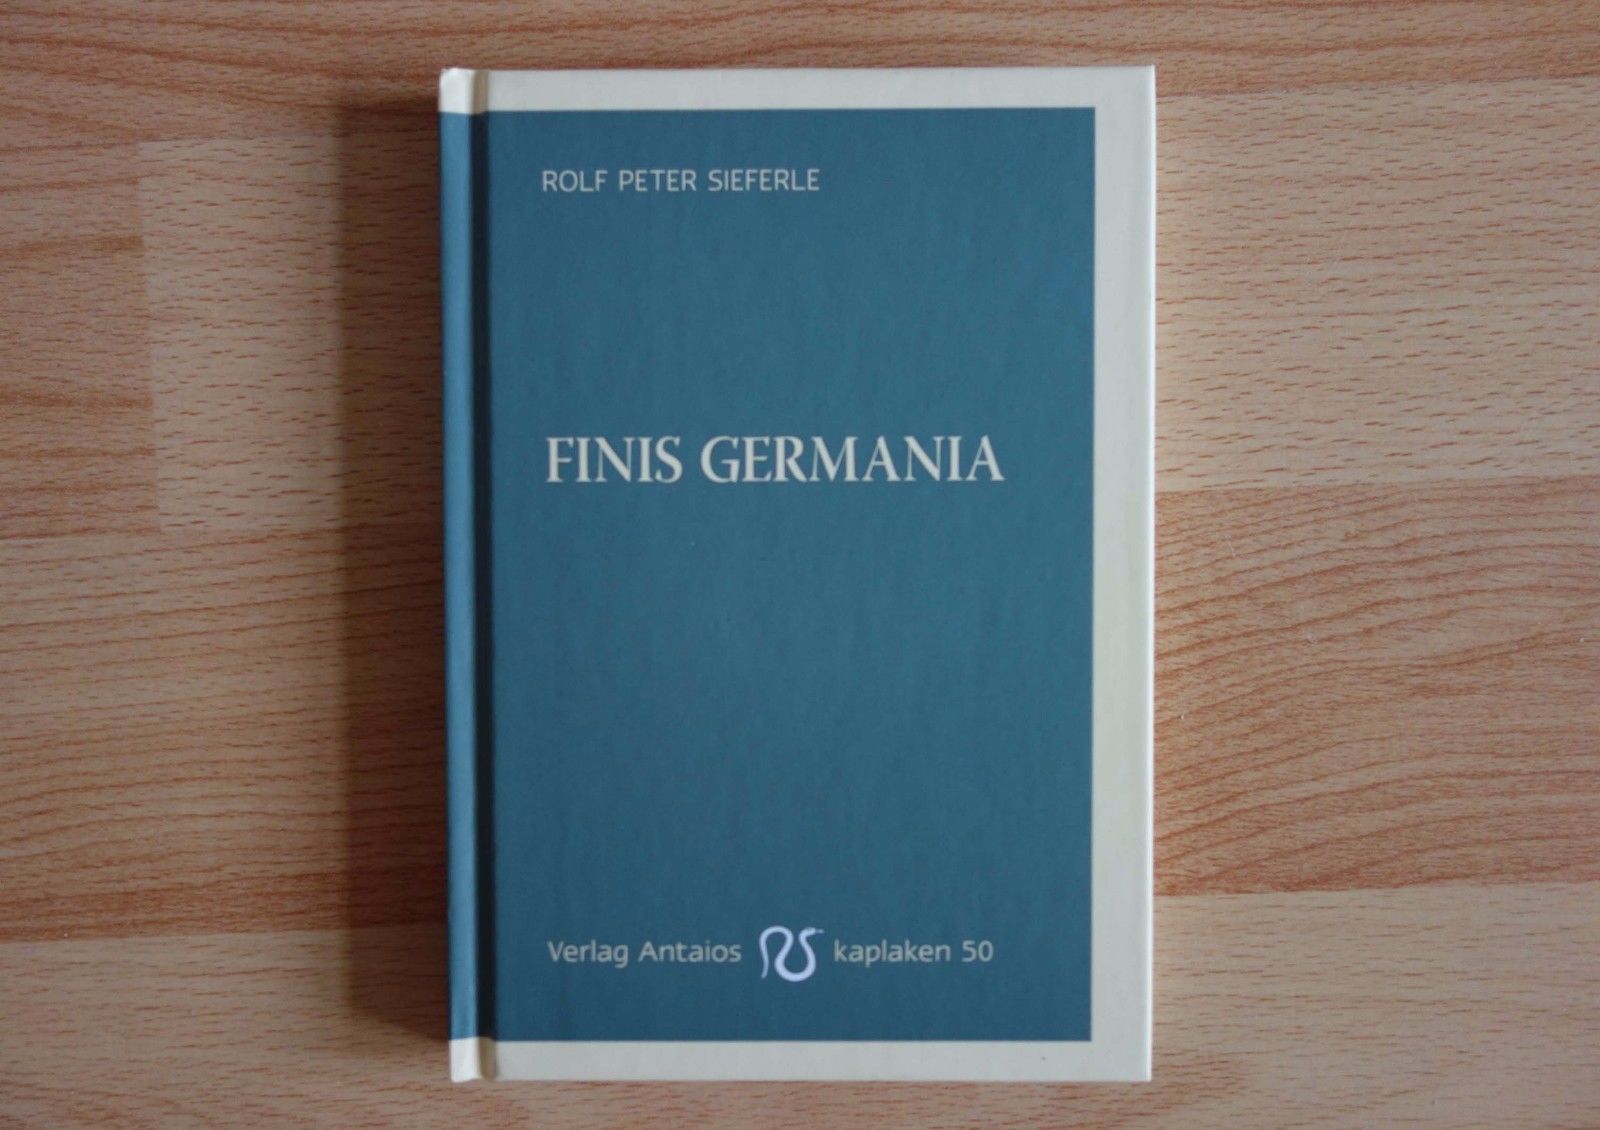 Finis Germania - Rolf Peter Sieferle - Edition Antaios TOP!